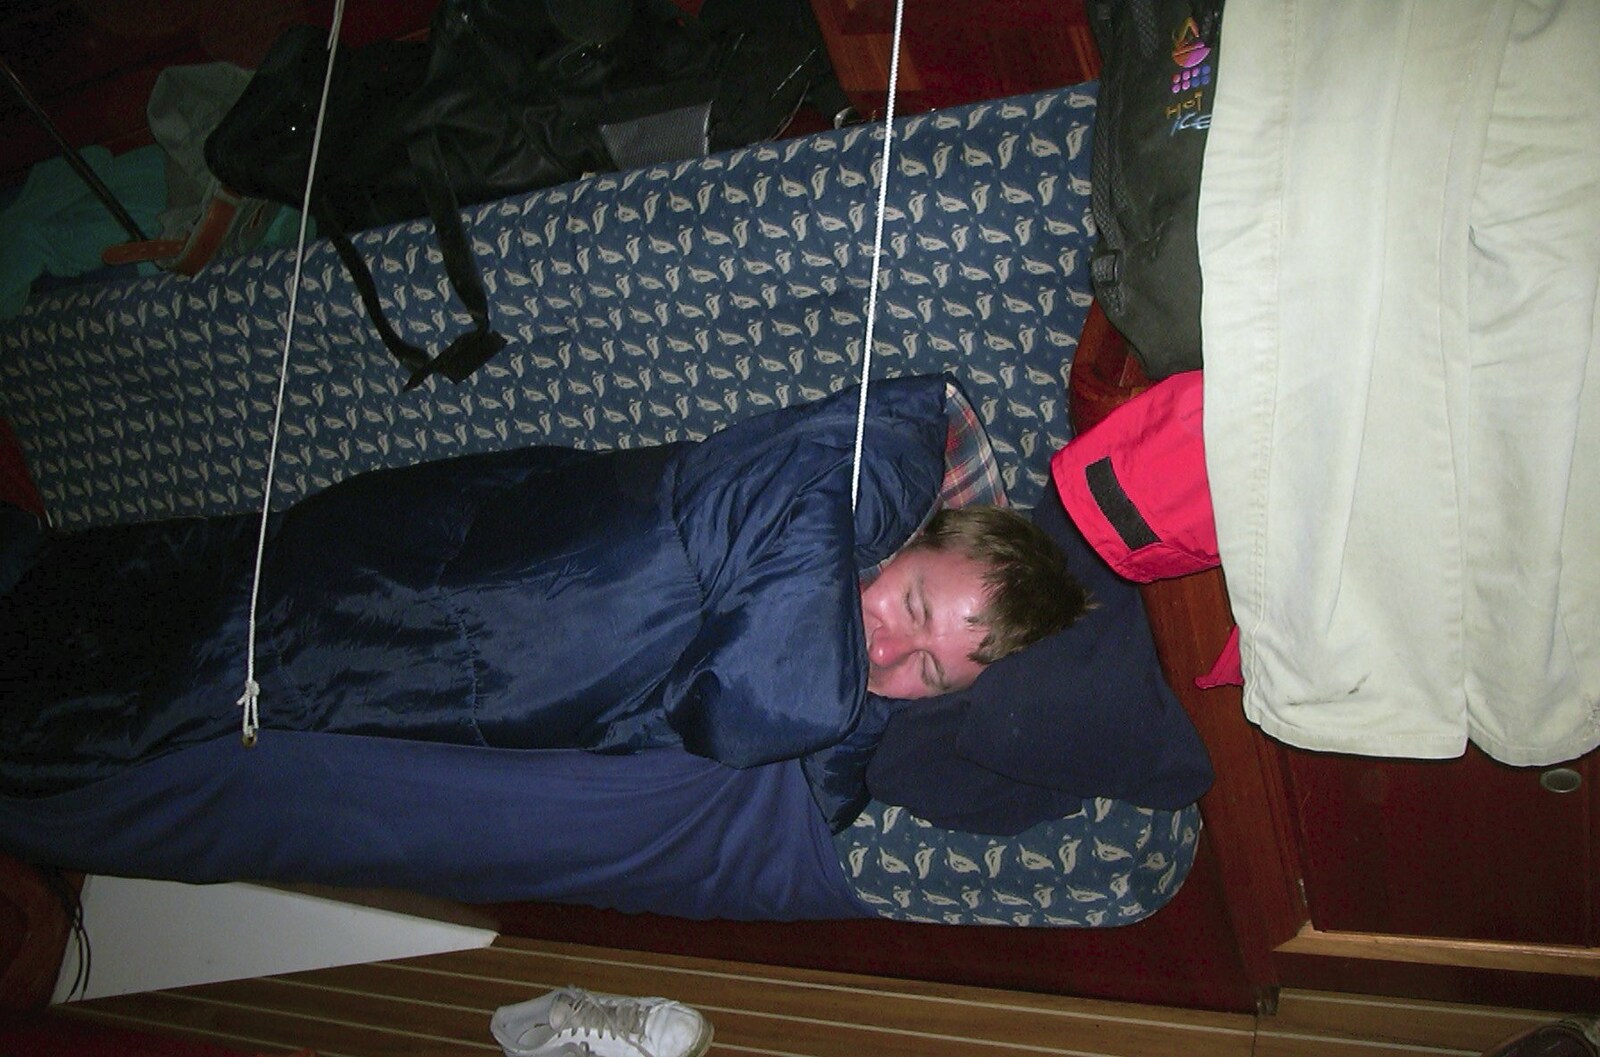 Paul's asleep and strapped in from A 3G Lab Sailing Trip, Shotley, Suffolk - 6th September 2001